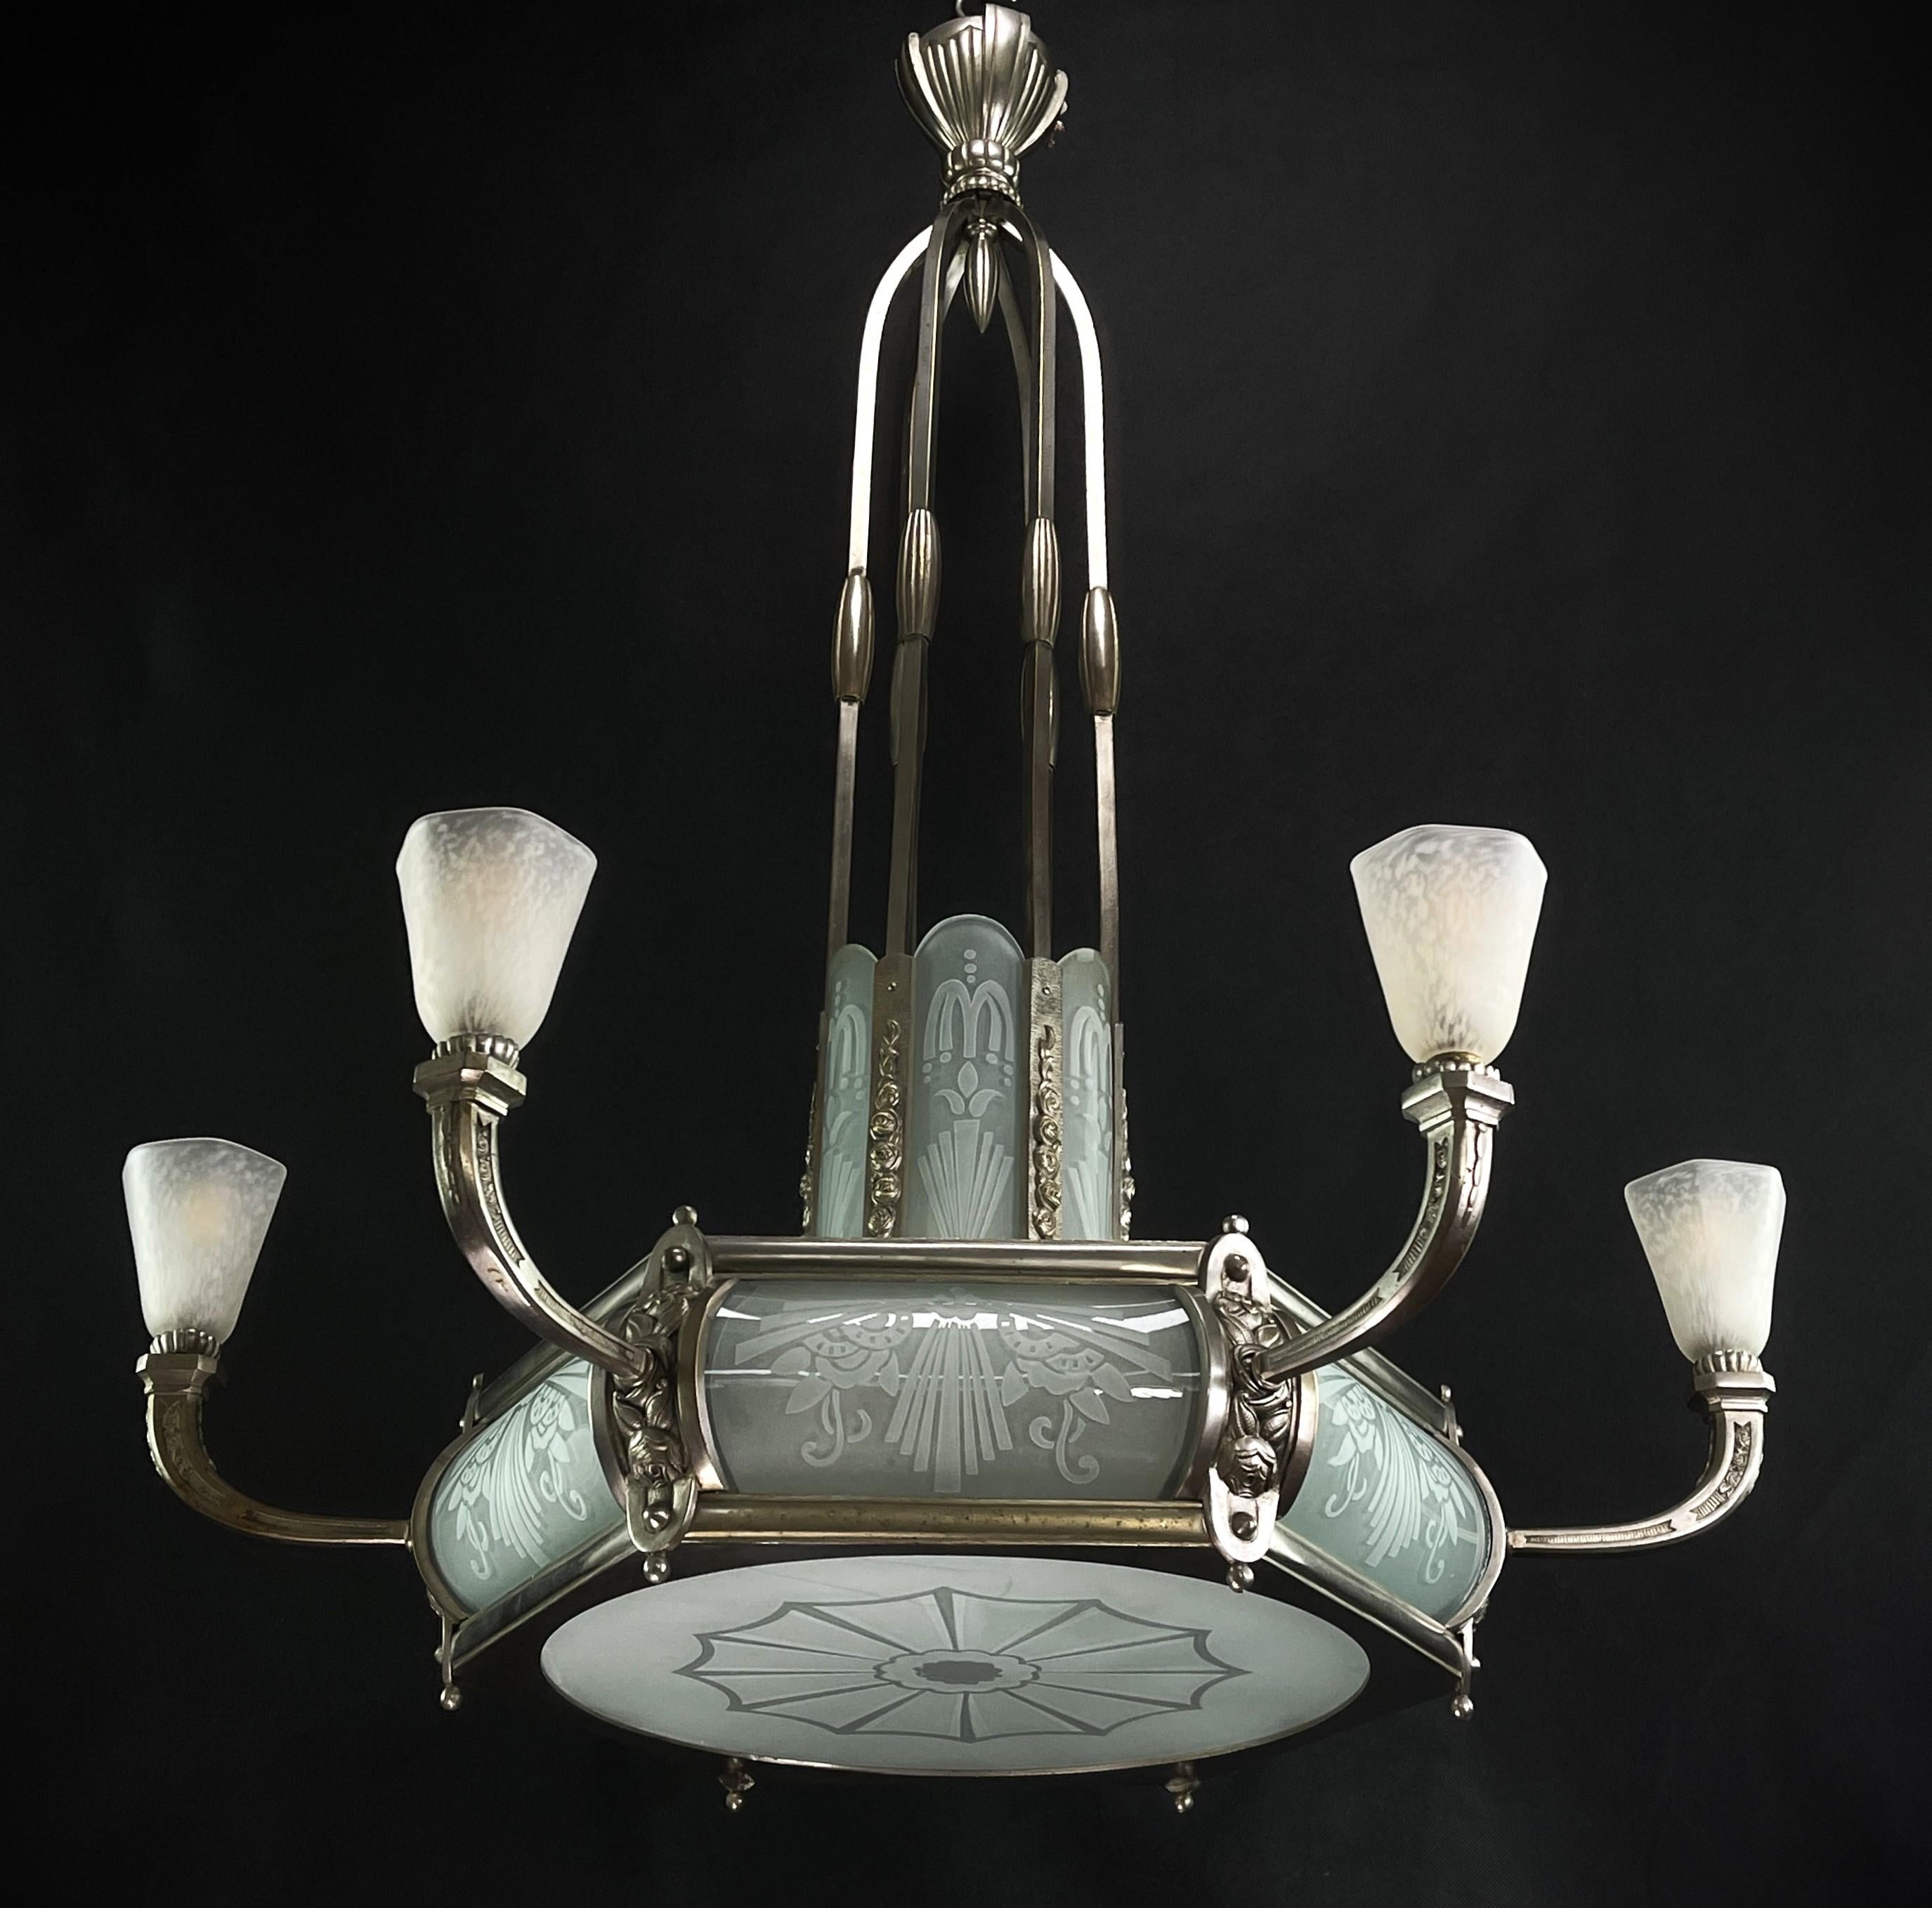 Art Deco chandelier 

This stunning 1930s Art Deco chandelier is an outstanding example of the elegance and sophistication of the Art Deco style. With its combination of metal and glass, this chandelier embodies the glamor and opulence of the